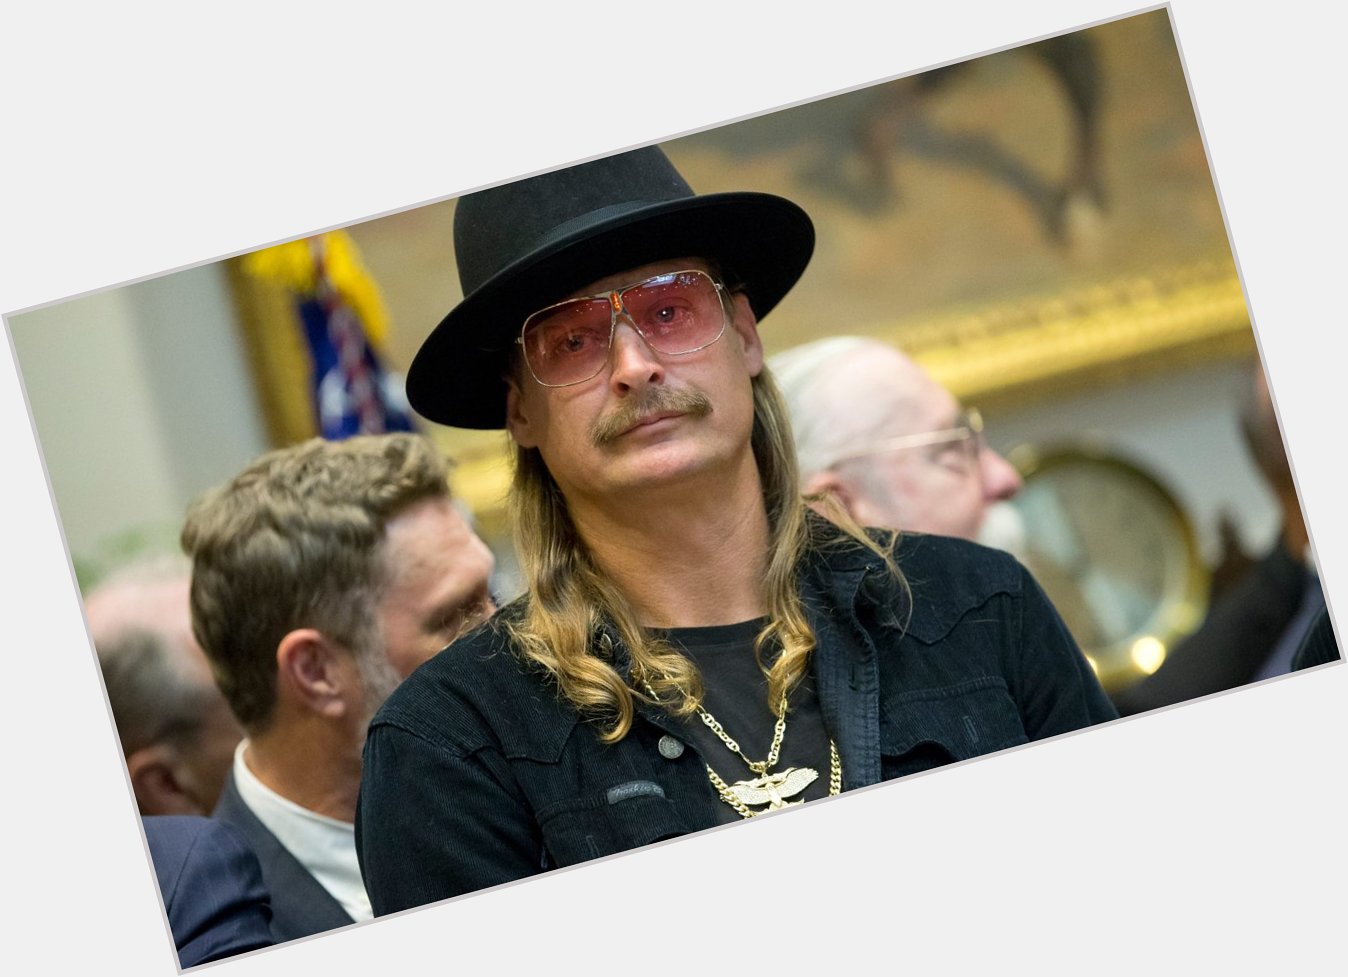 Please join me here at in wishing the one and only Kid Rock a very Happy 50th Birthday today  